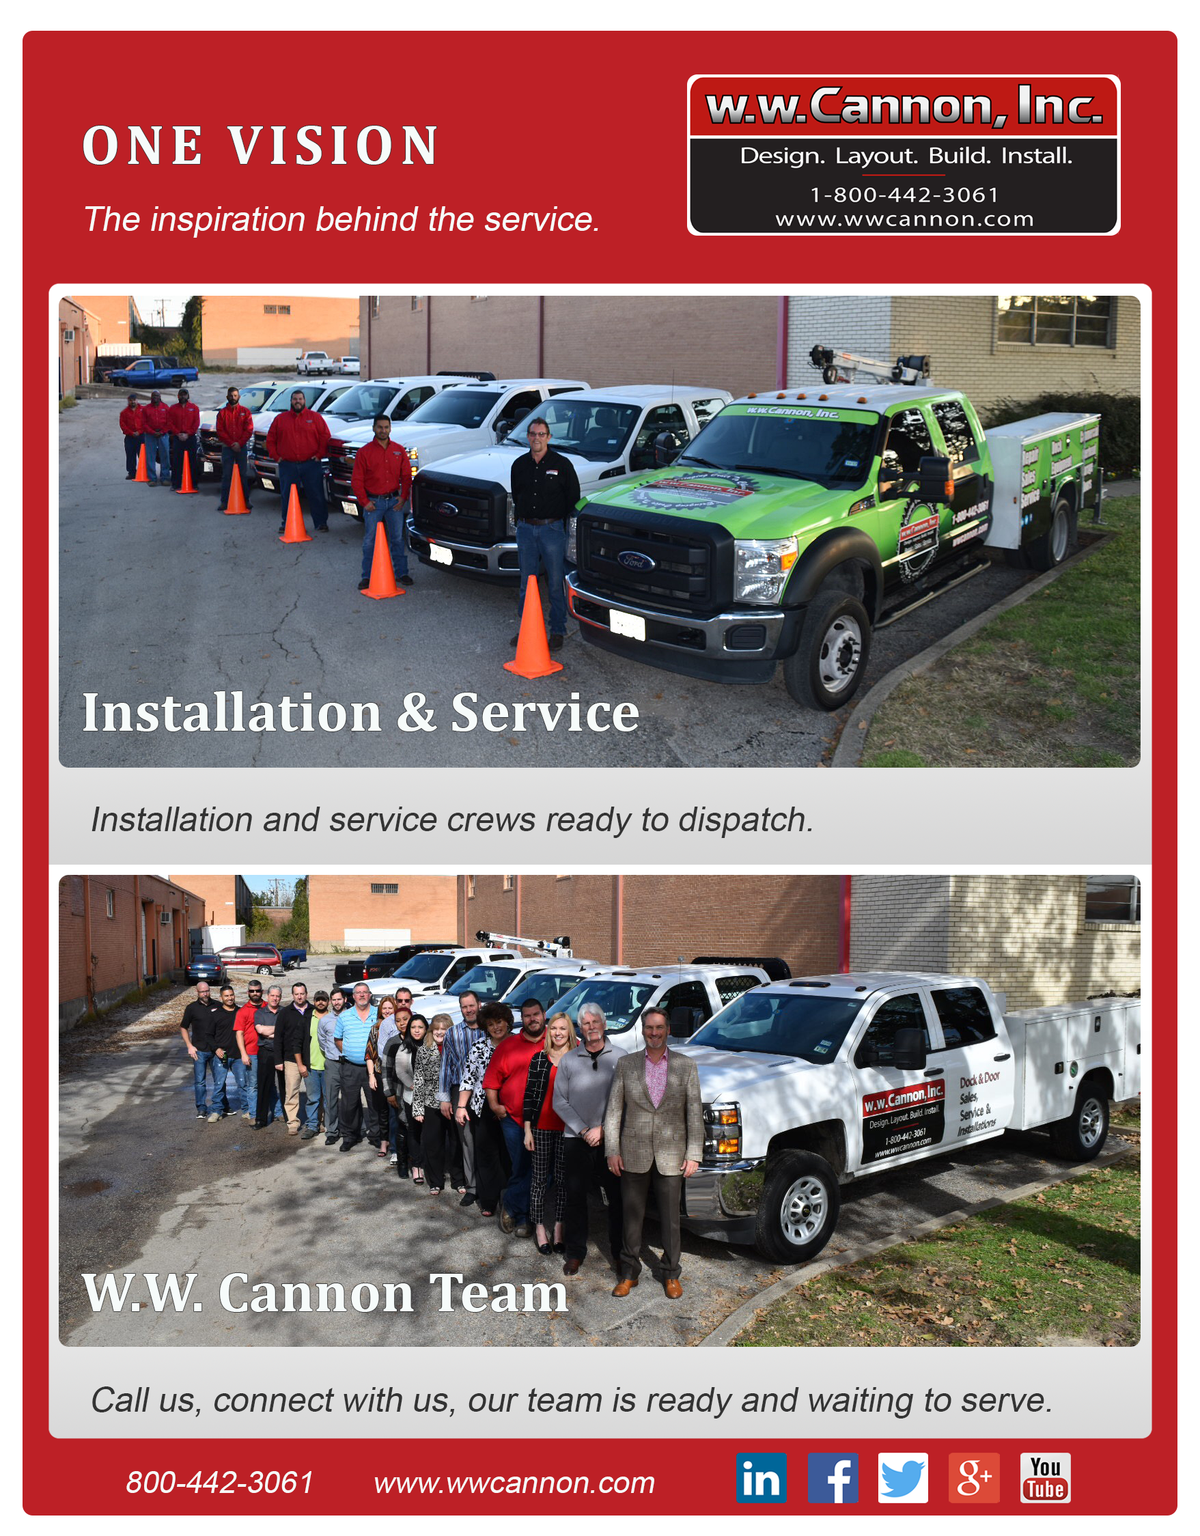 2017-catalog-inside-front-cover-fleet-of-trucks-and-employees